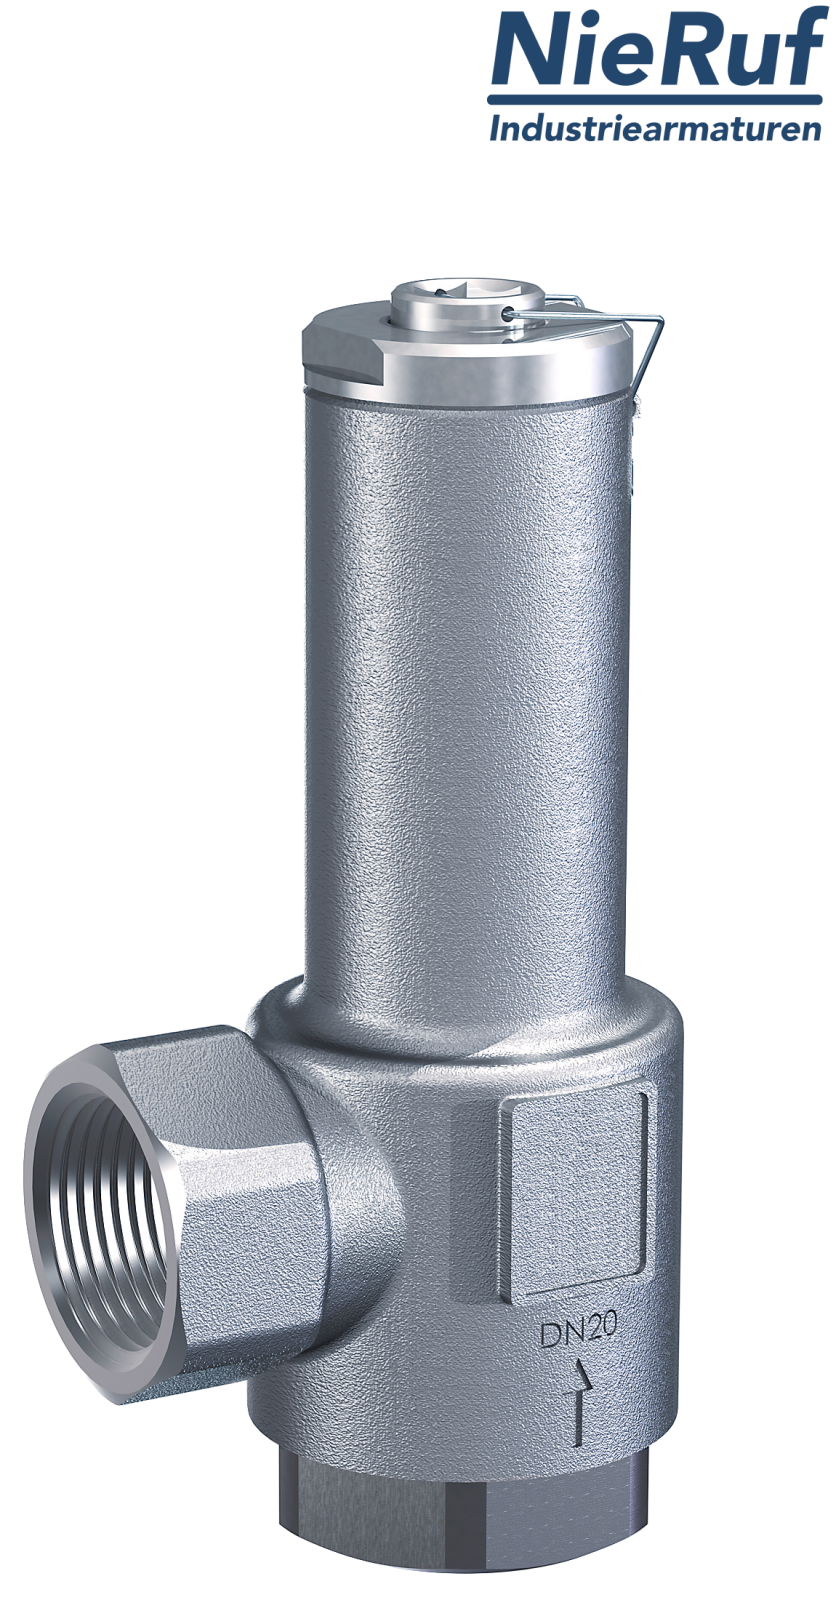 angle-type overflow valve 3/4" inch fm UV04 stainless steel AISI 316L 0,5 - 2,5 bar